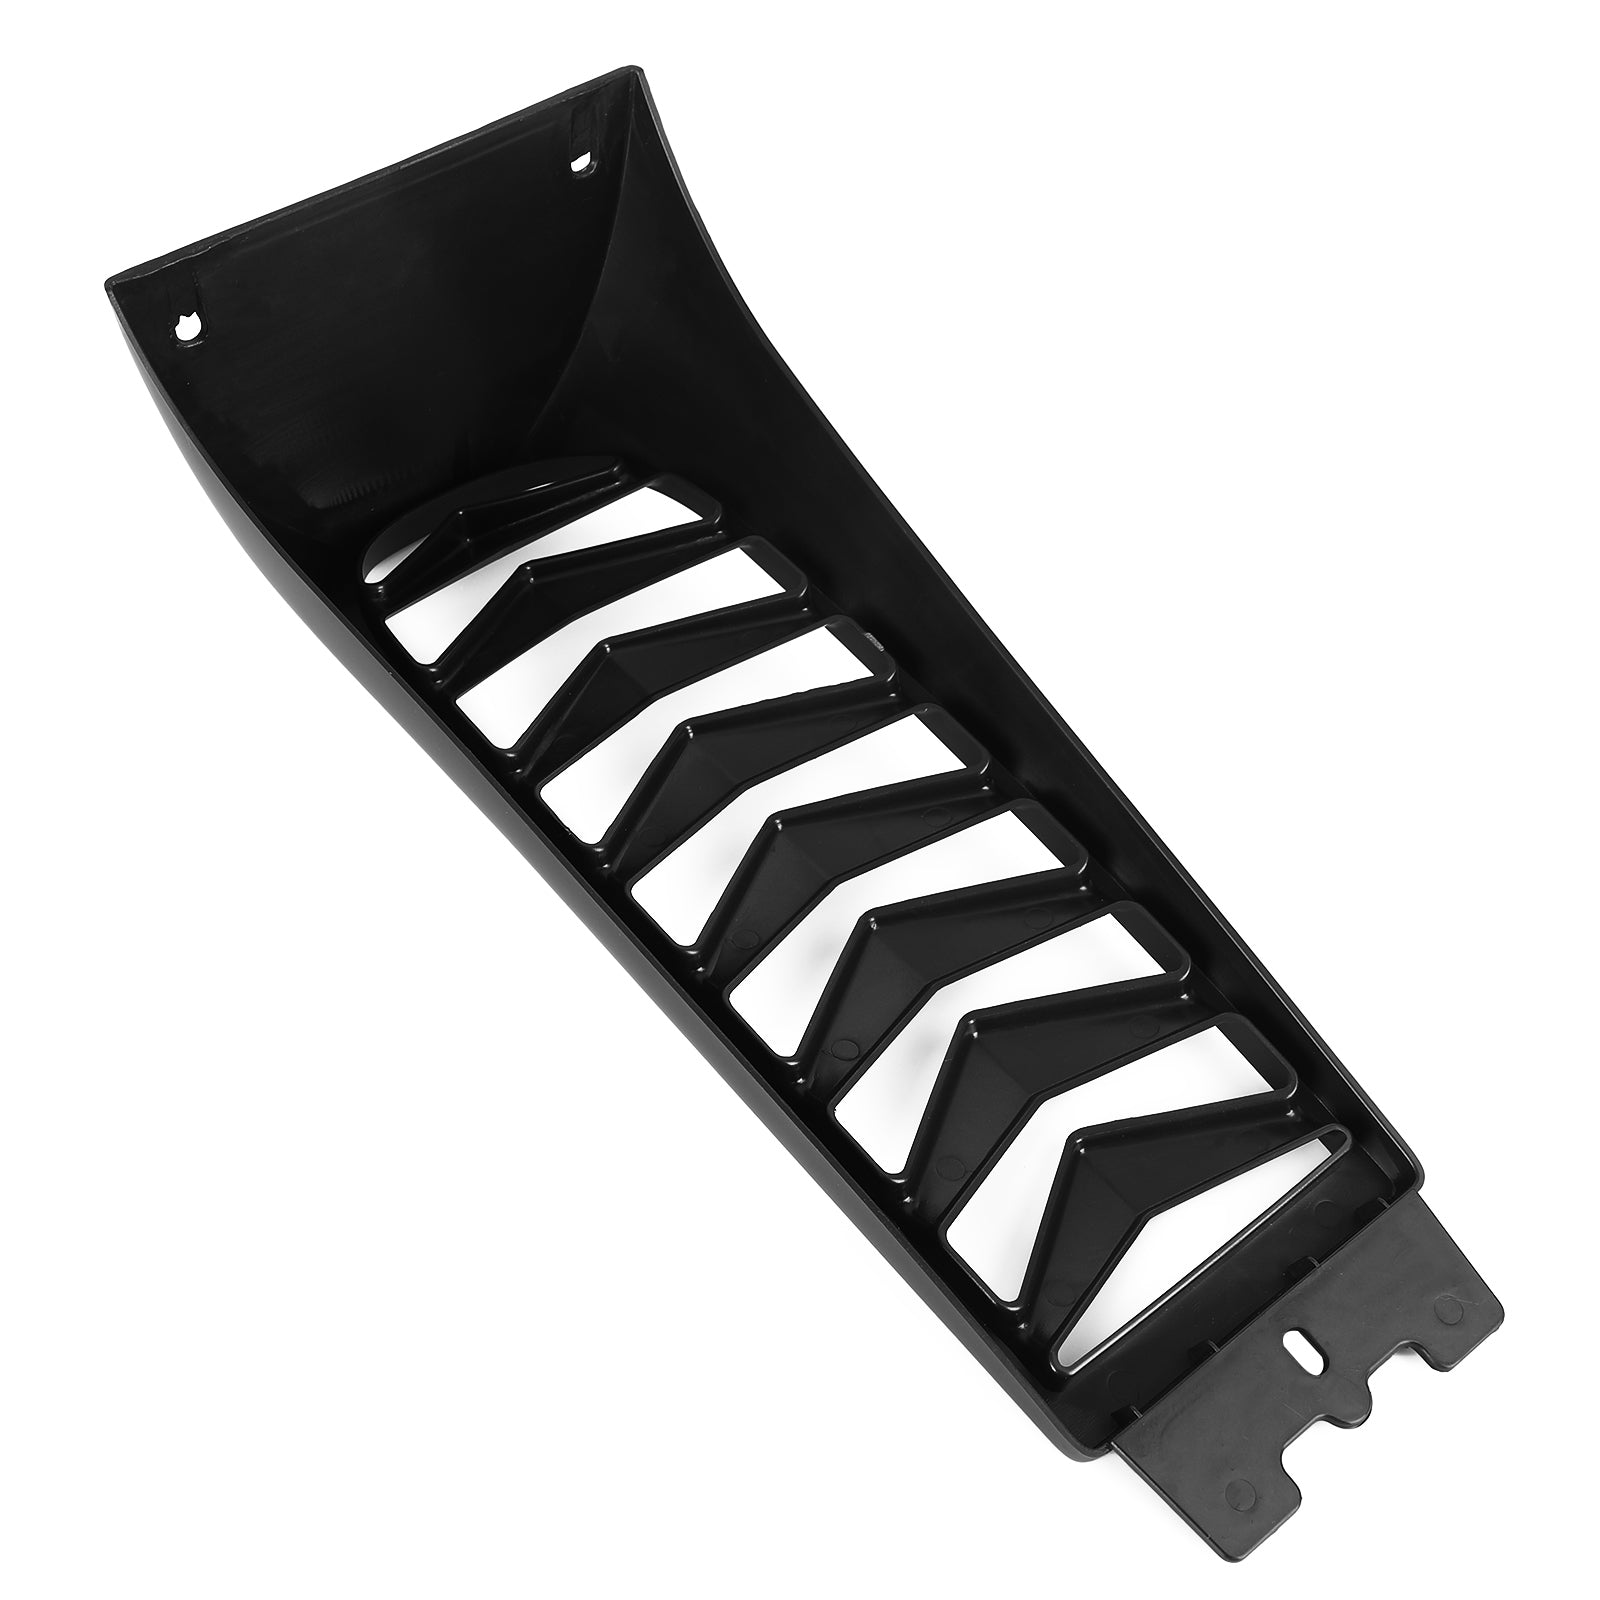 Front Chin Spoiler Lower Radiator Cover for Softail Breakout Fat Bob 2018-2021 Black Generic